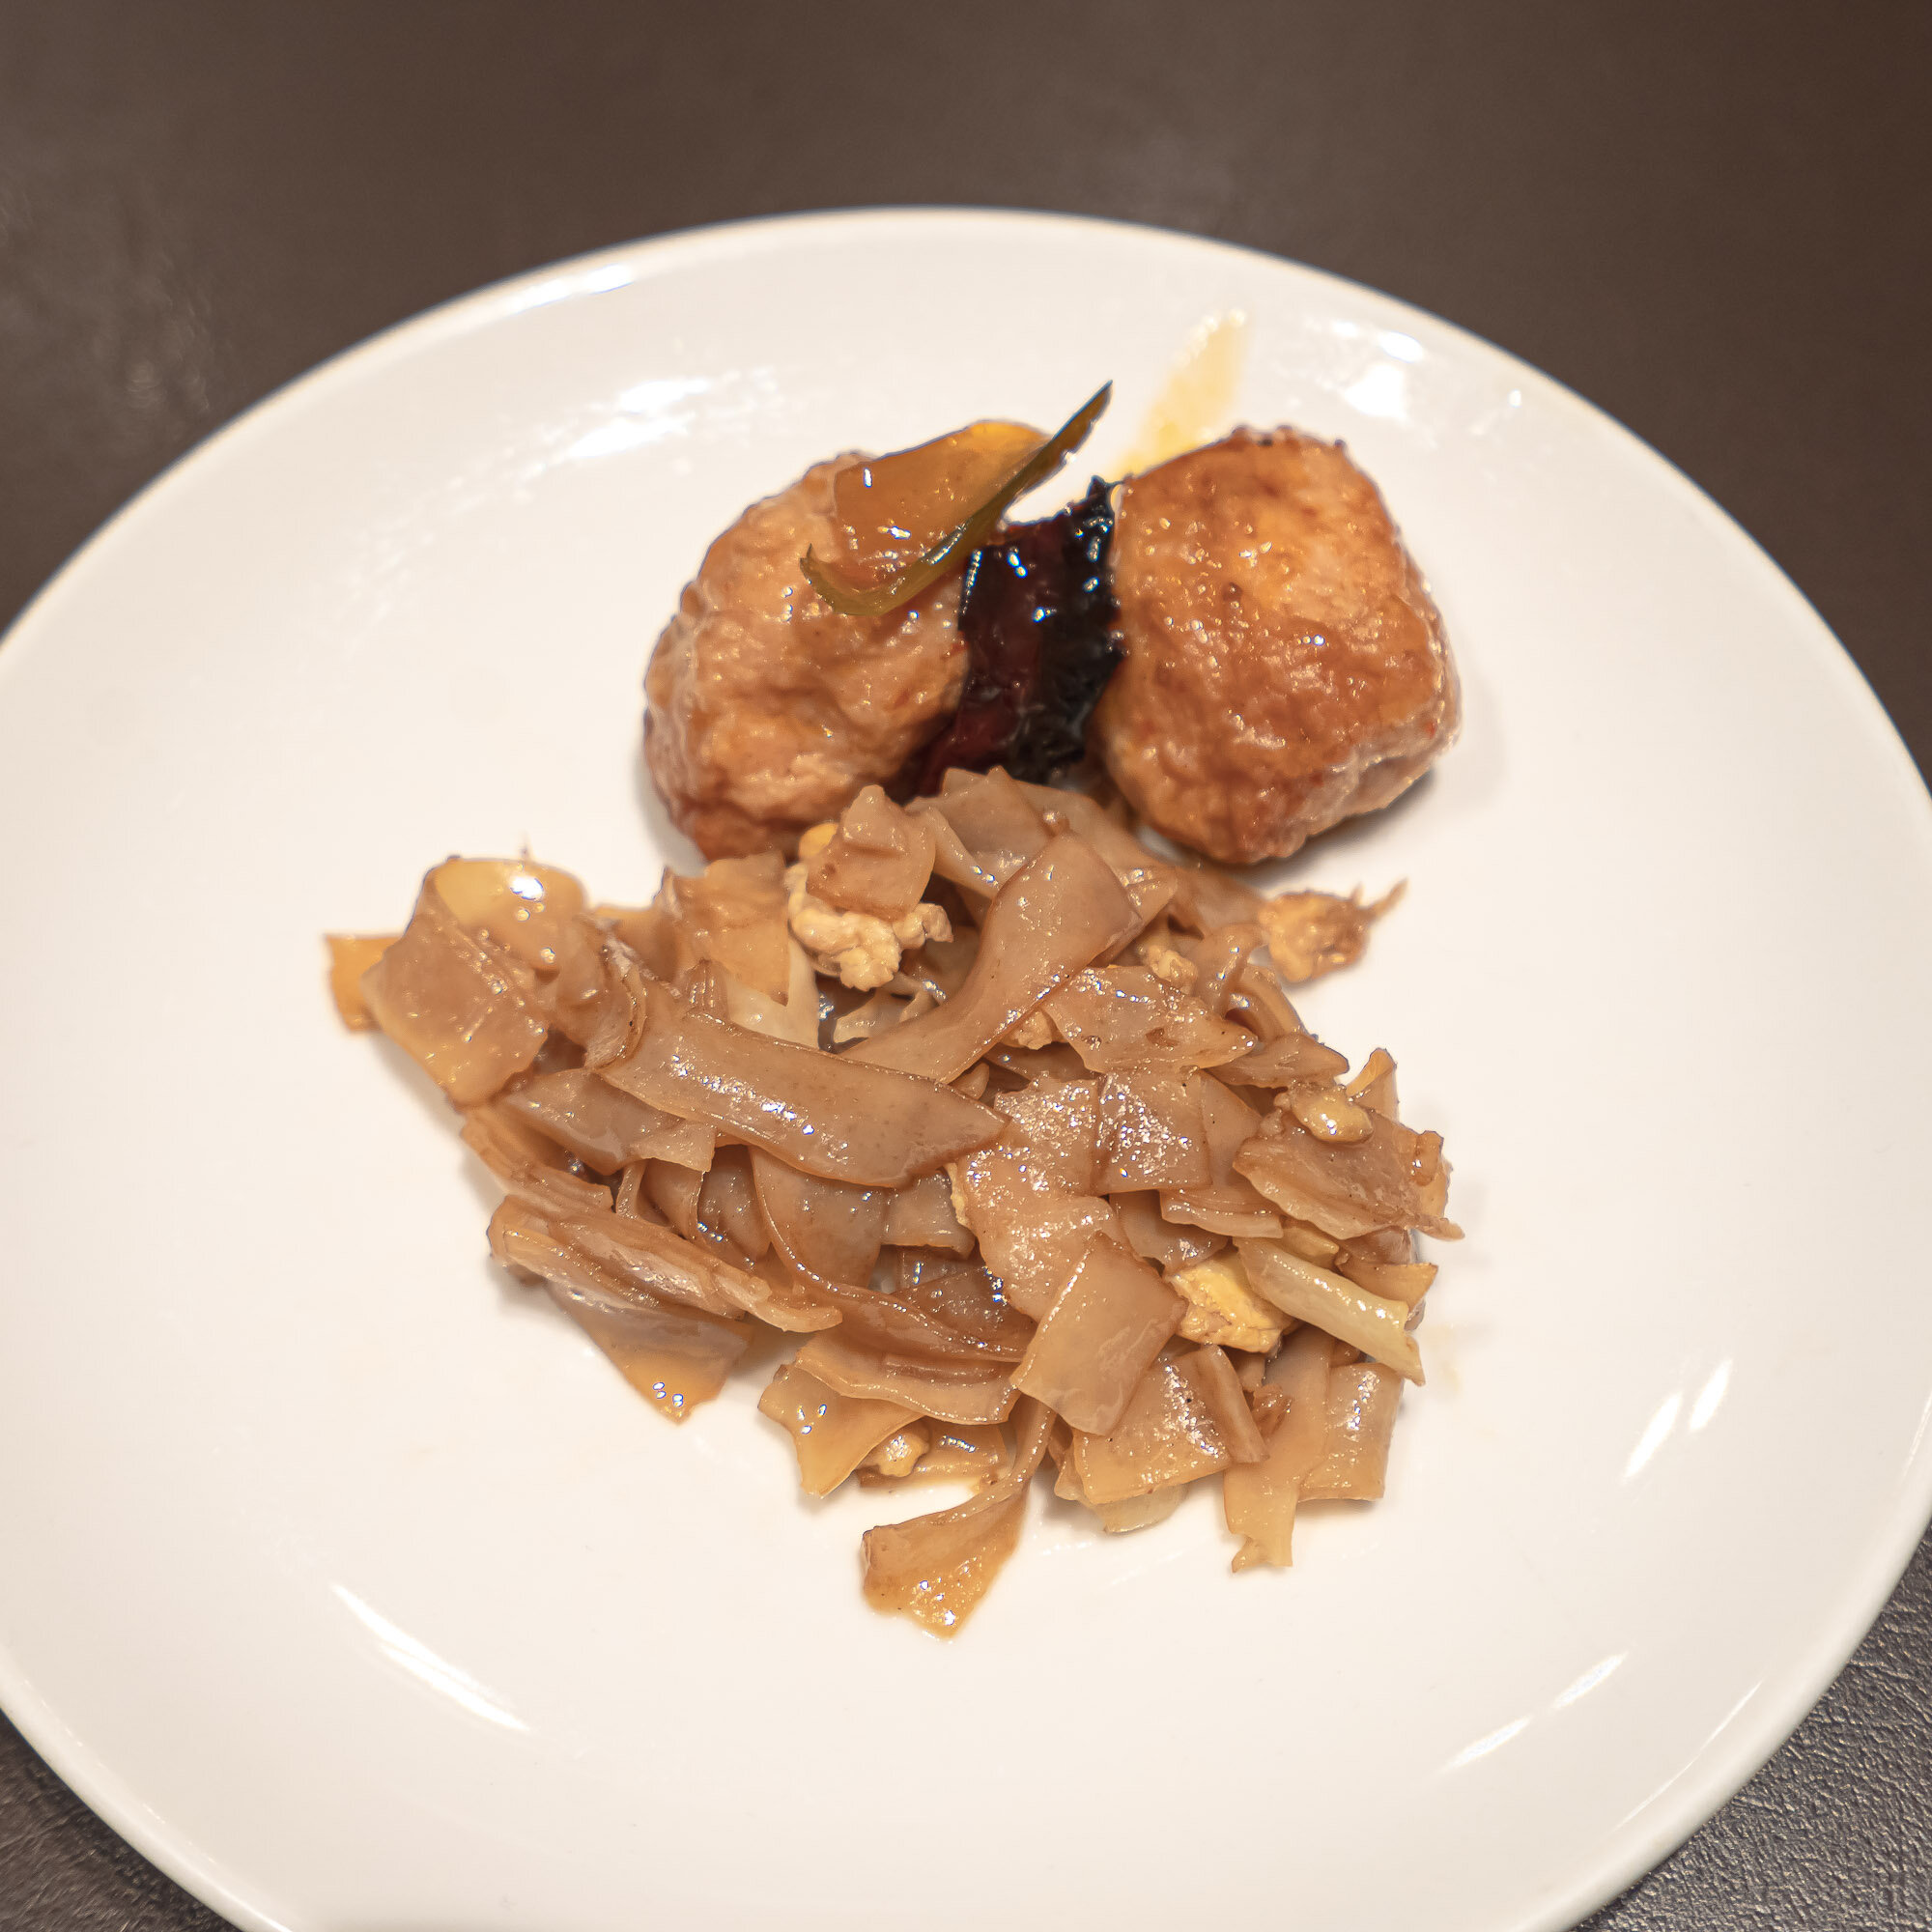 Kway teow and spicy chicken